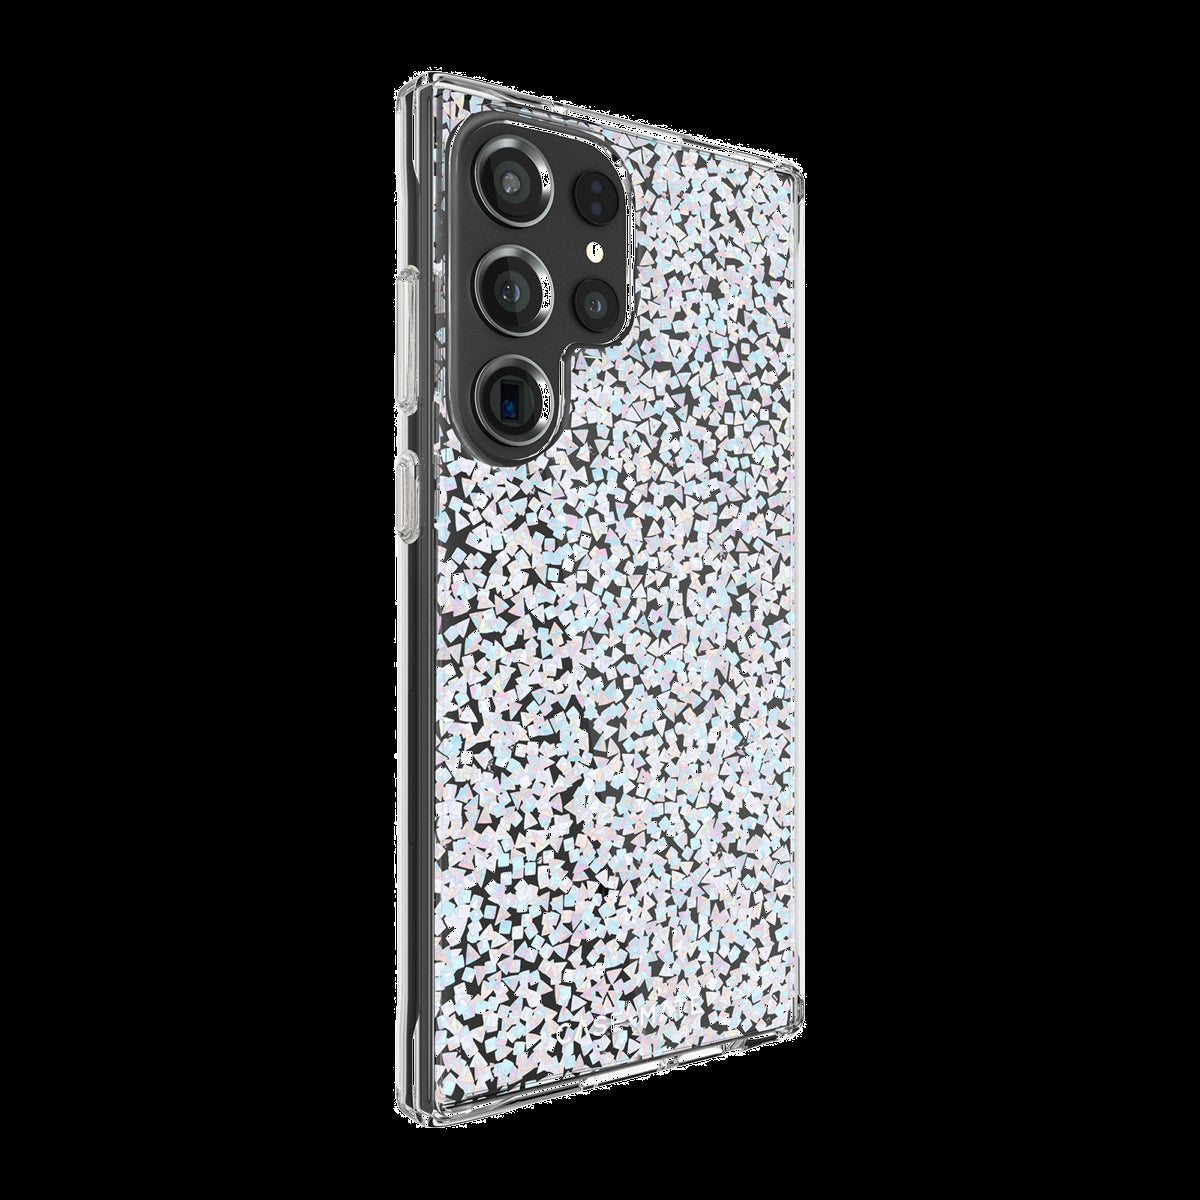 Add a little more glam to your life with the Case-Mate Twinkle case featuring iridescent glitter foil and 10 feet drop protection.